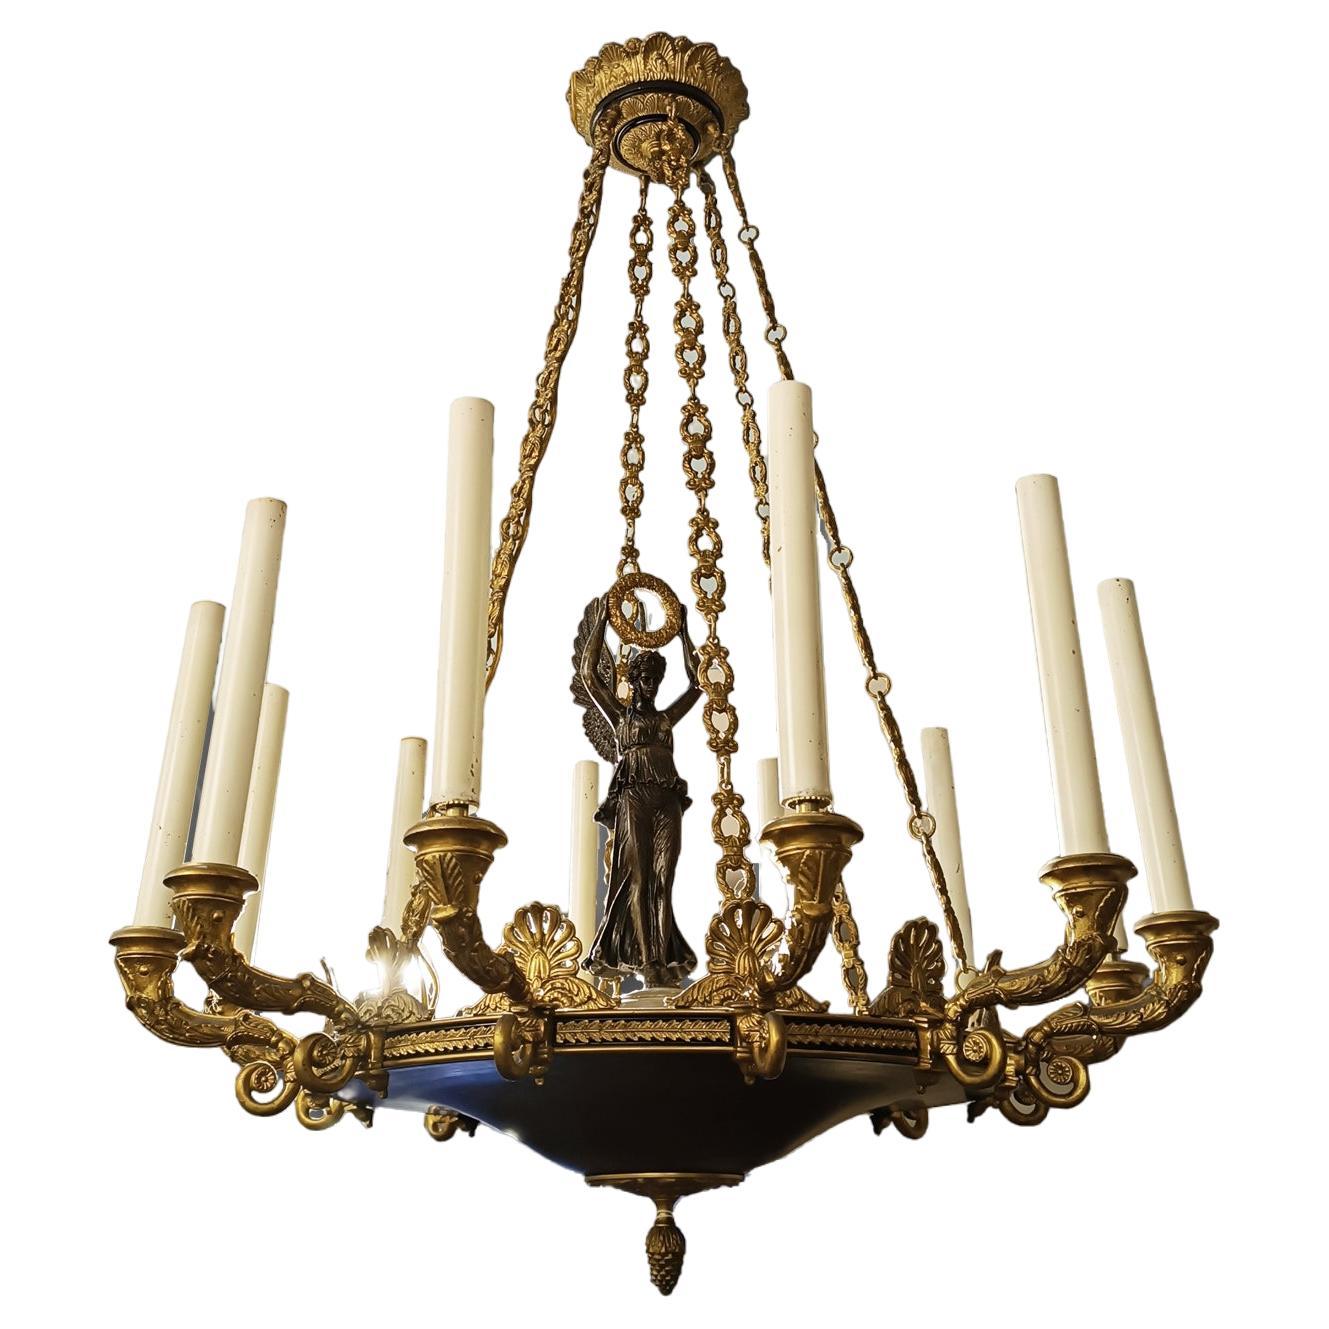 19th CENTURY NAPOLEON III CHANDELIER WITH WINGED VICTORY